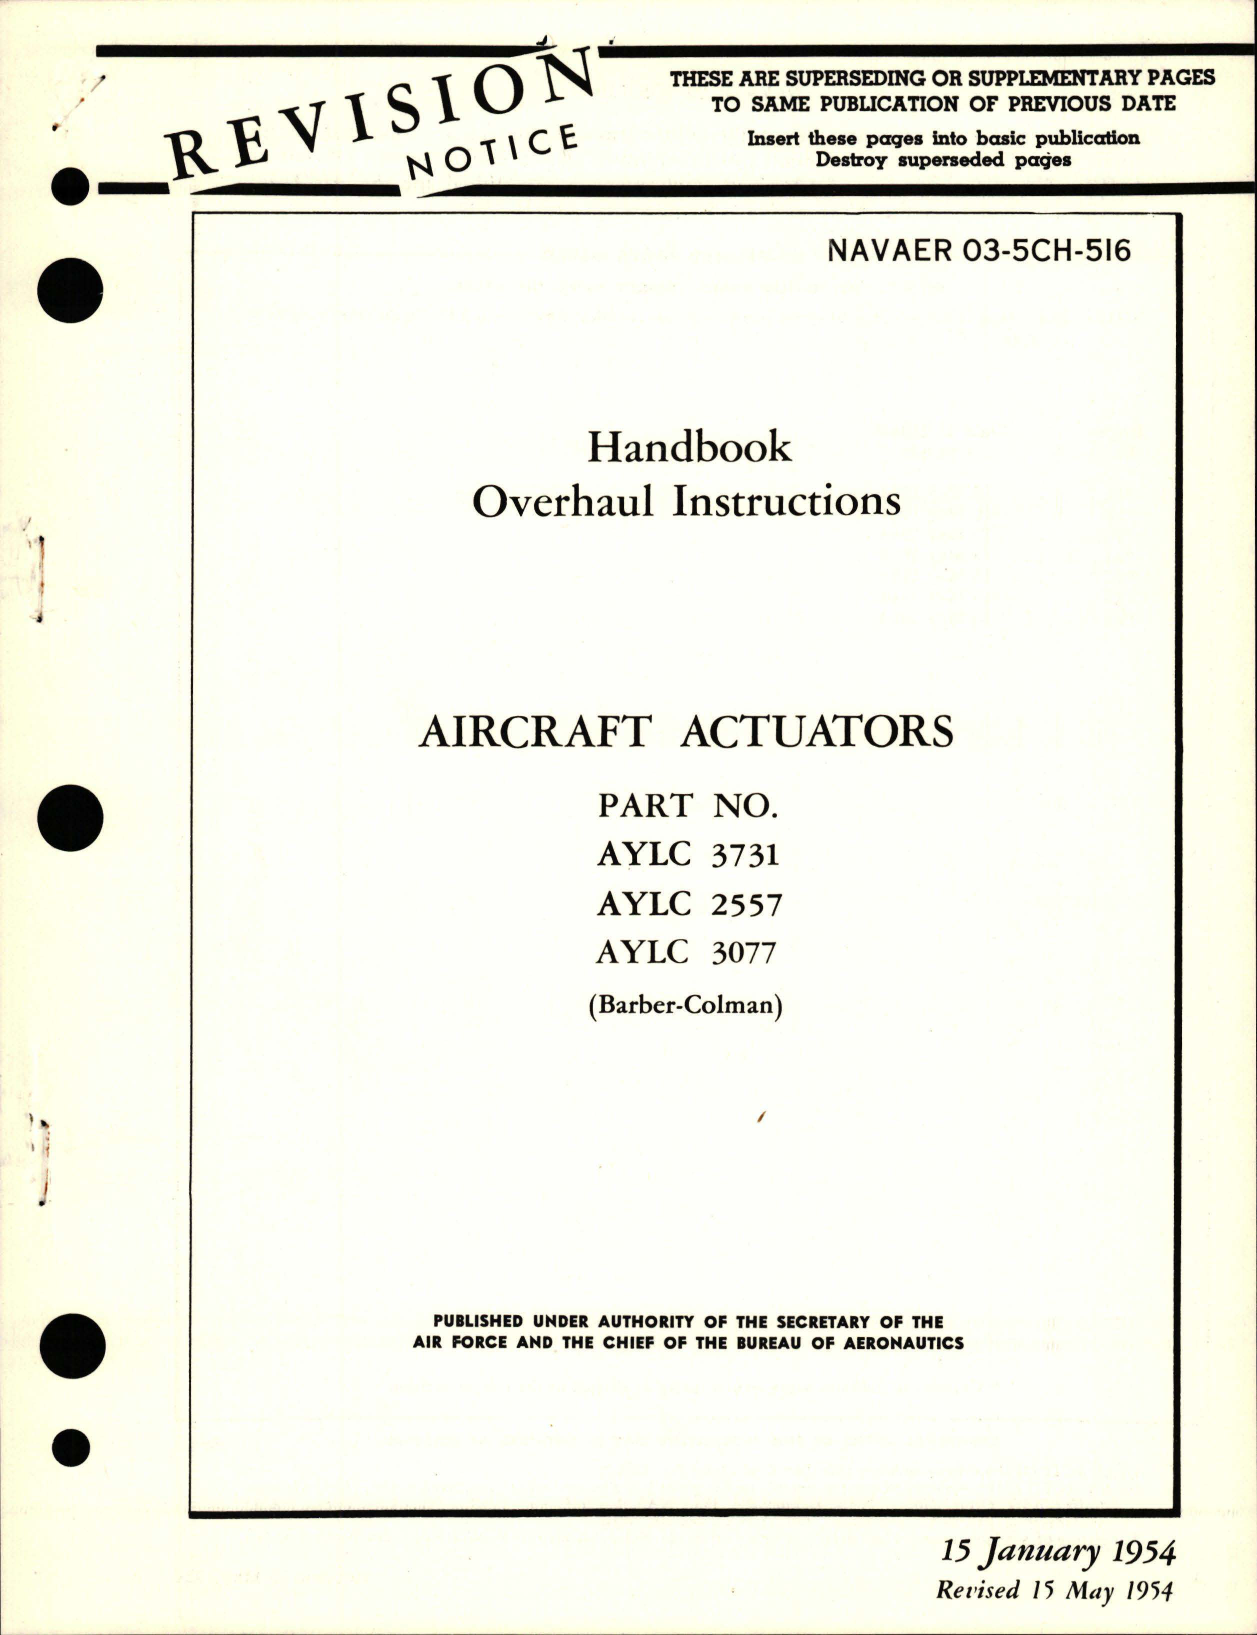 Sample page 1 from AirCorps Library document: Overhaul Instructions for Actuators - Parts AYLC 3731, AYLC 2557, and AYLC 3077